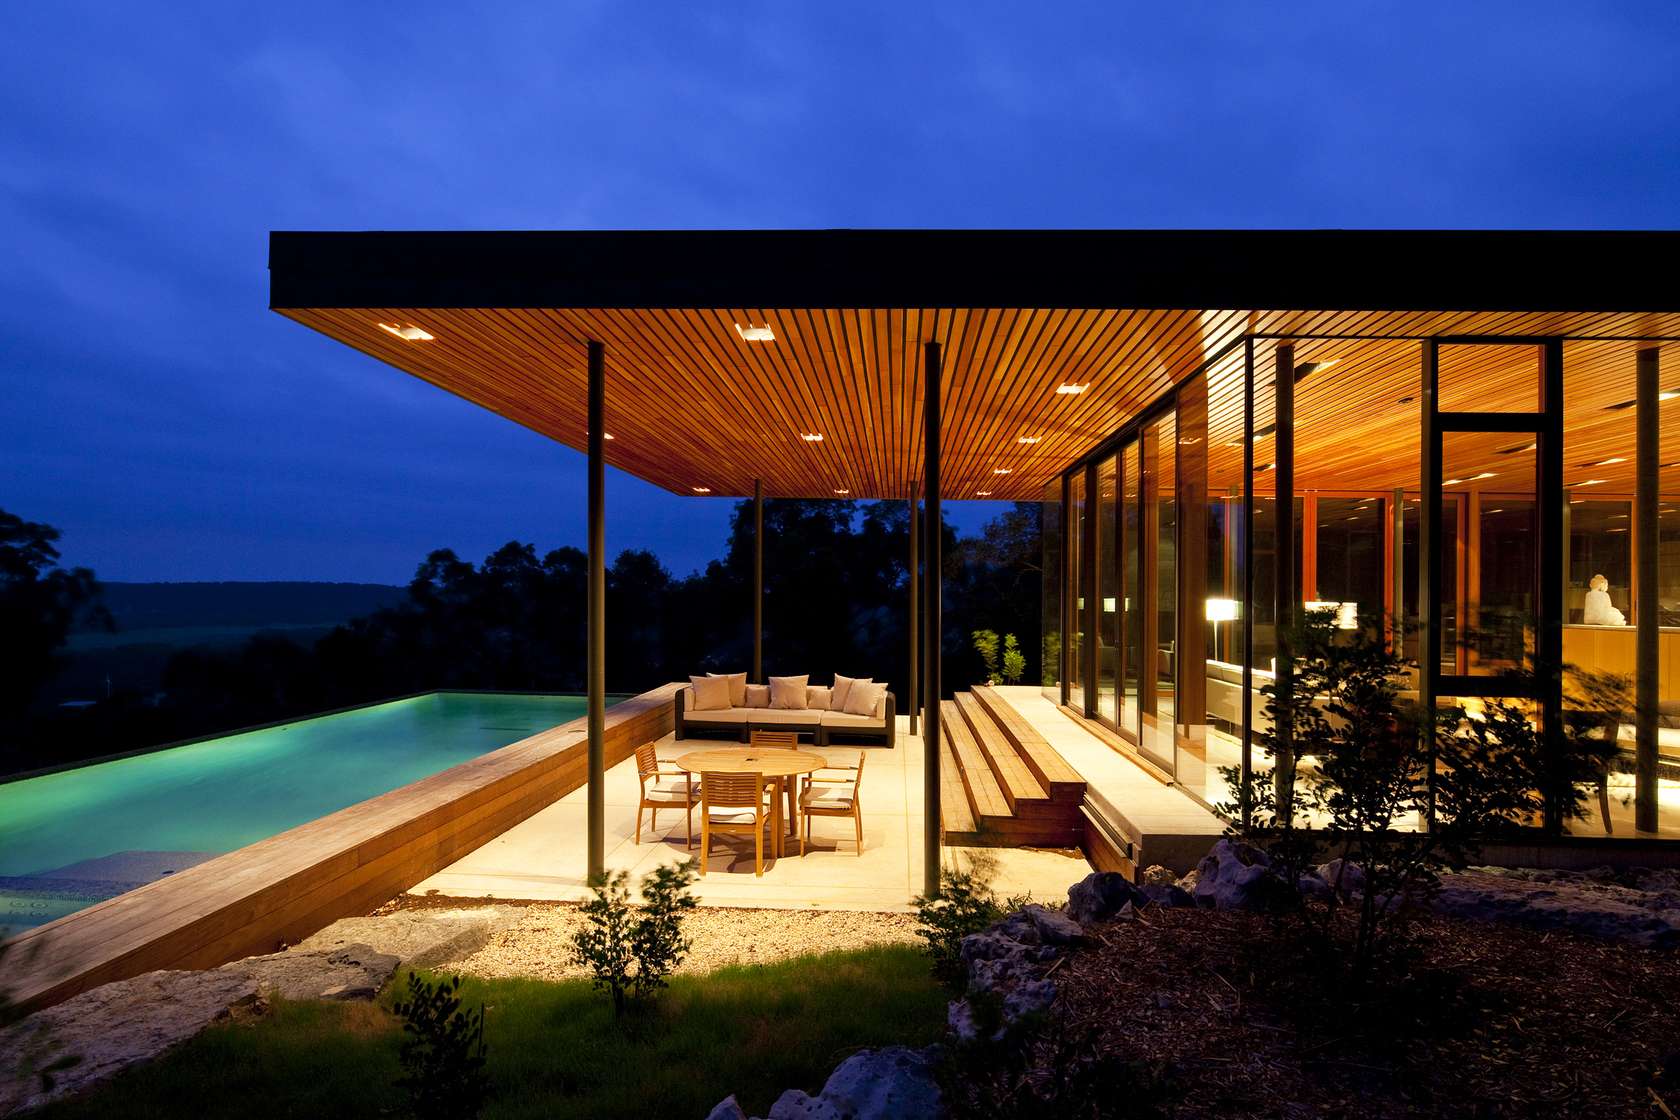 House of the Day - Celebrating Residential Architecture: Alphabet of Houses